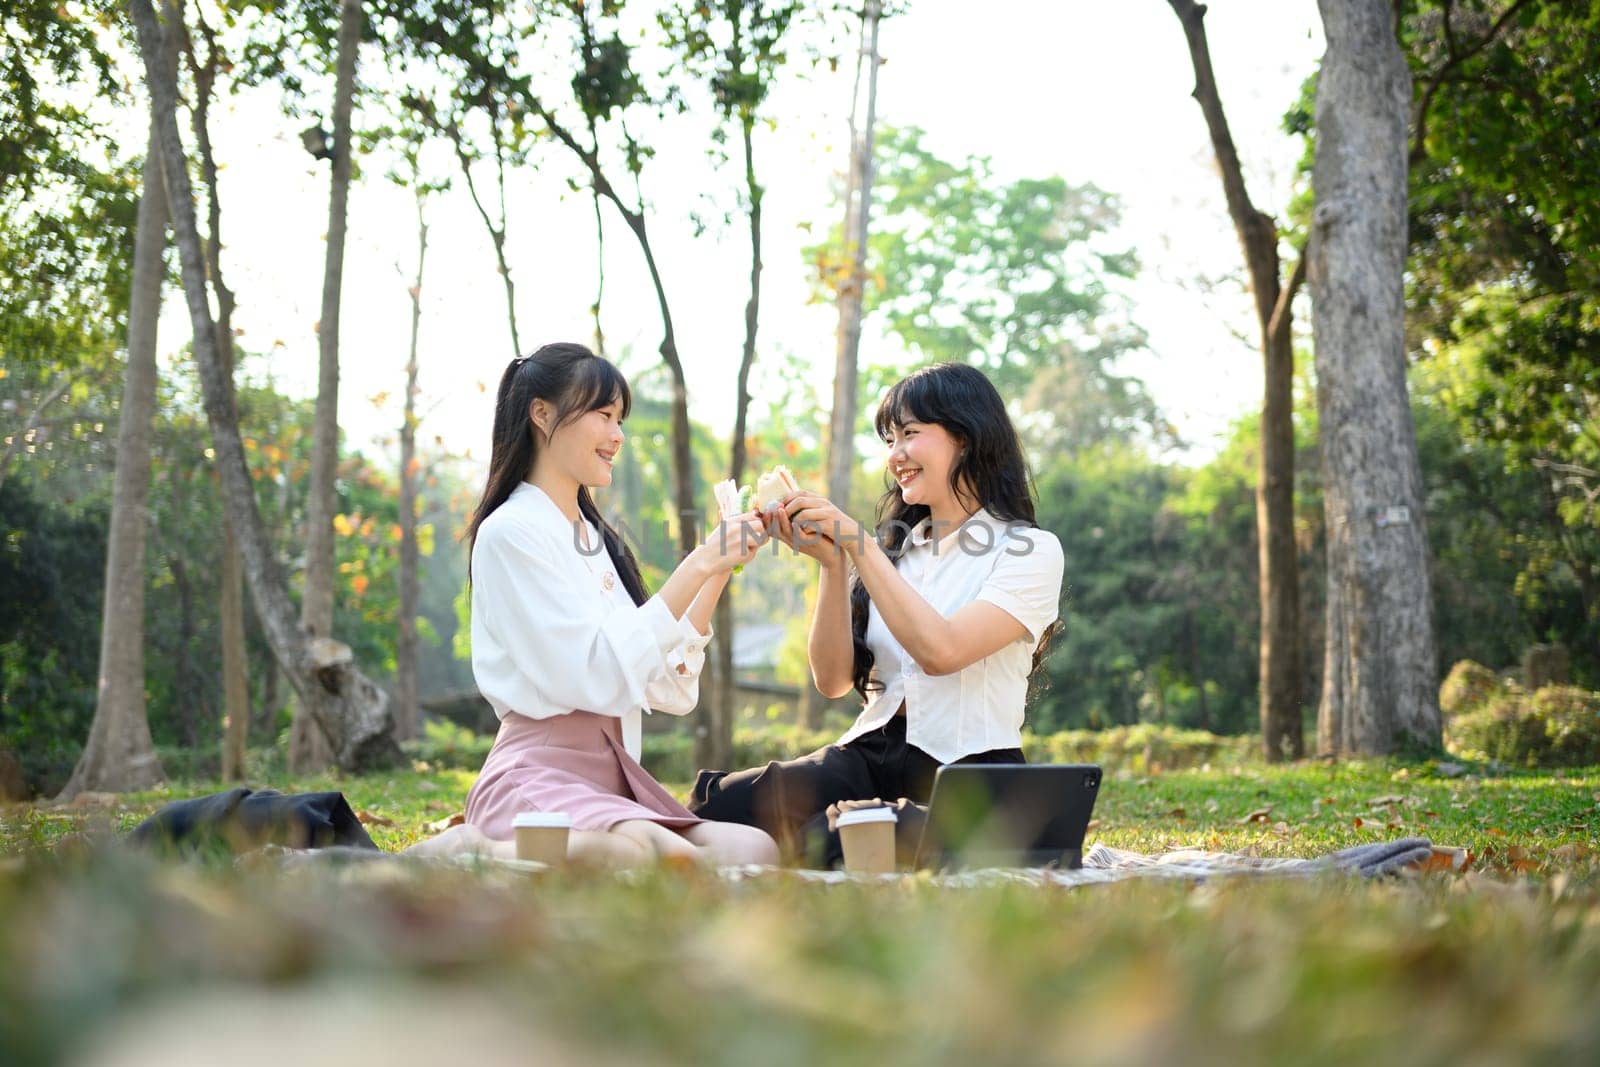 Young woman friends sitting on grass and eating sandwiches during picnic in park